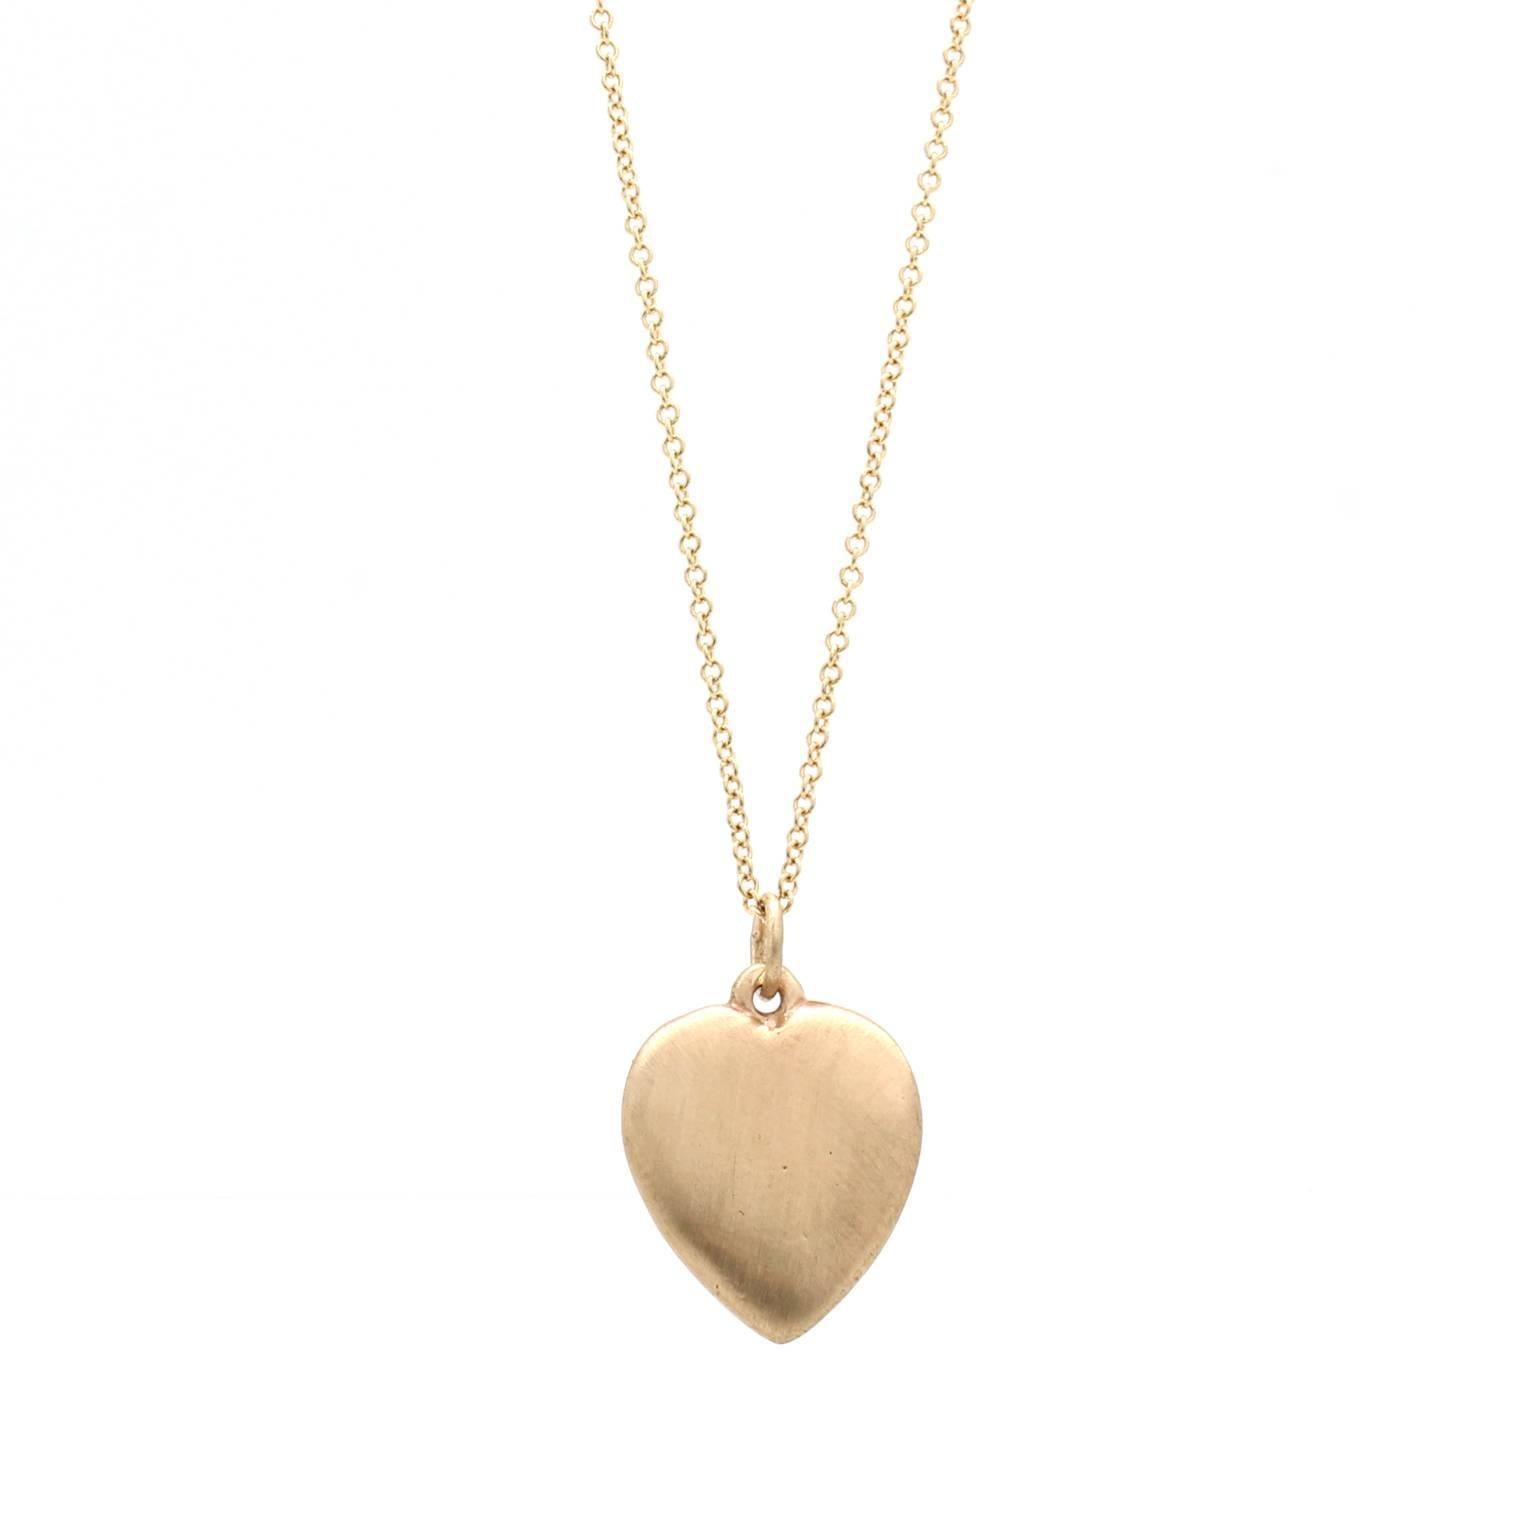 This 14k yellow gold heart pendant features a raised wishbone motif. The heart is rounded on the front and back and the metal has a satin finish. The pendant is solid (not hollow) and is made of reclaimed gold. The heart measures 13mm by 15mm and